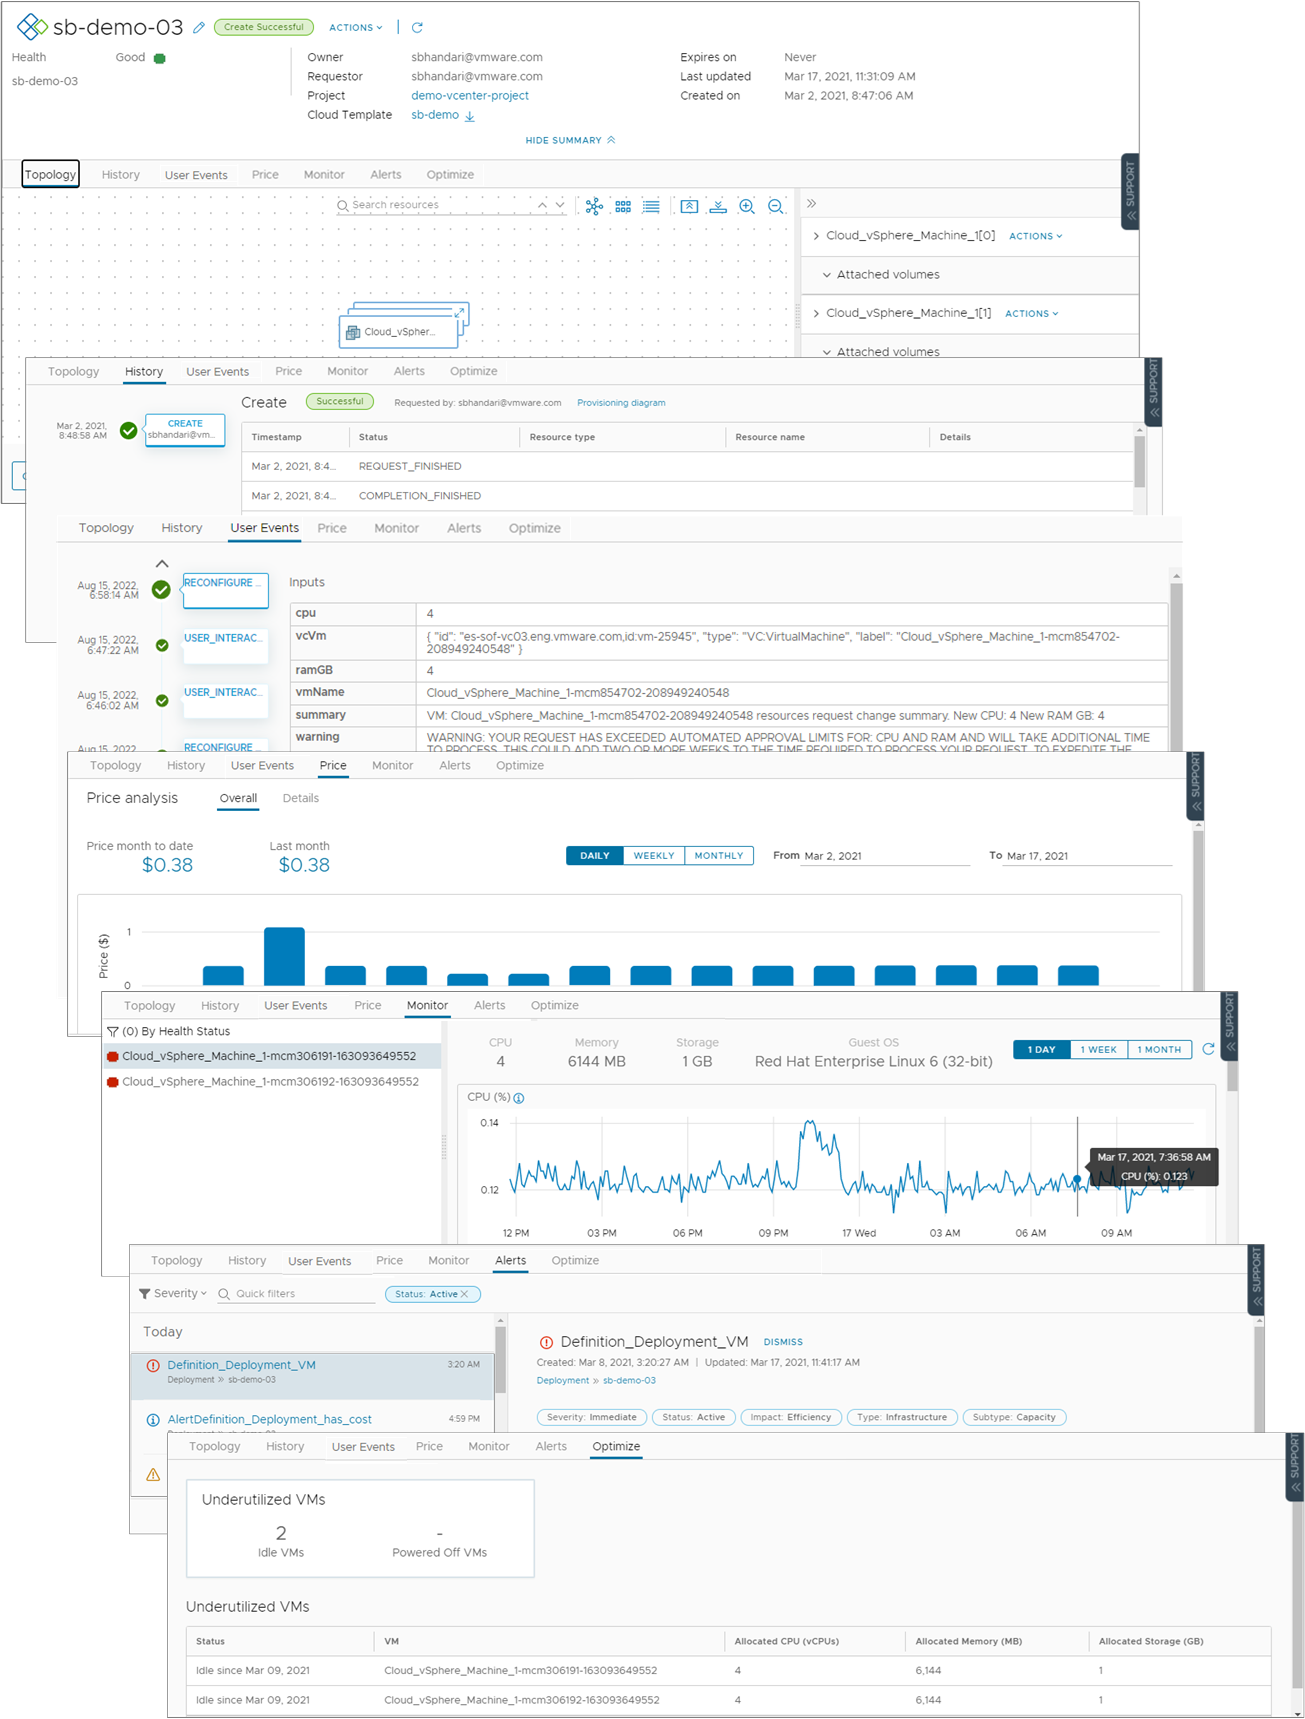 The deployment details showing the Topology, History, User Events, Price, Monitor, Alerts, and Optimize tabs.